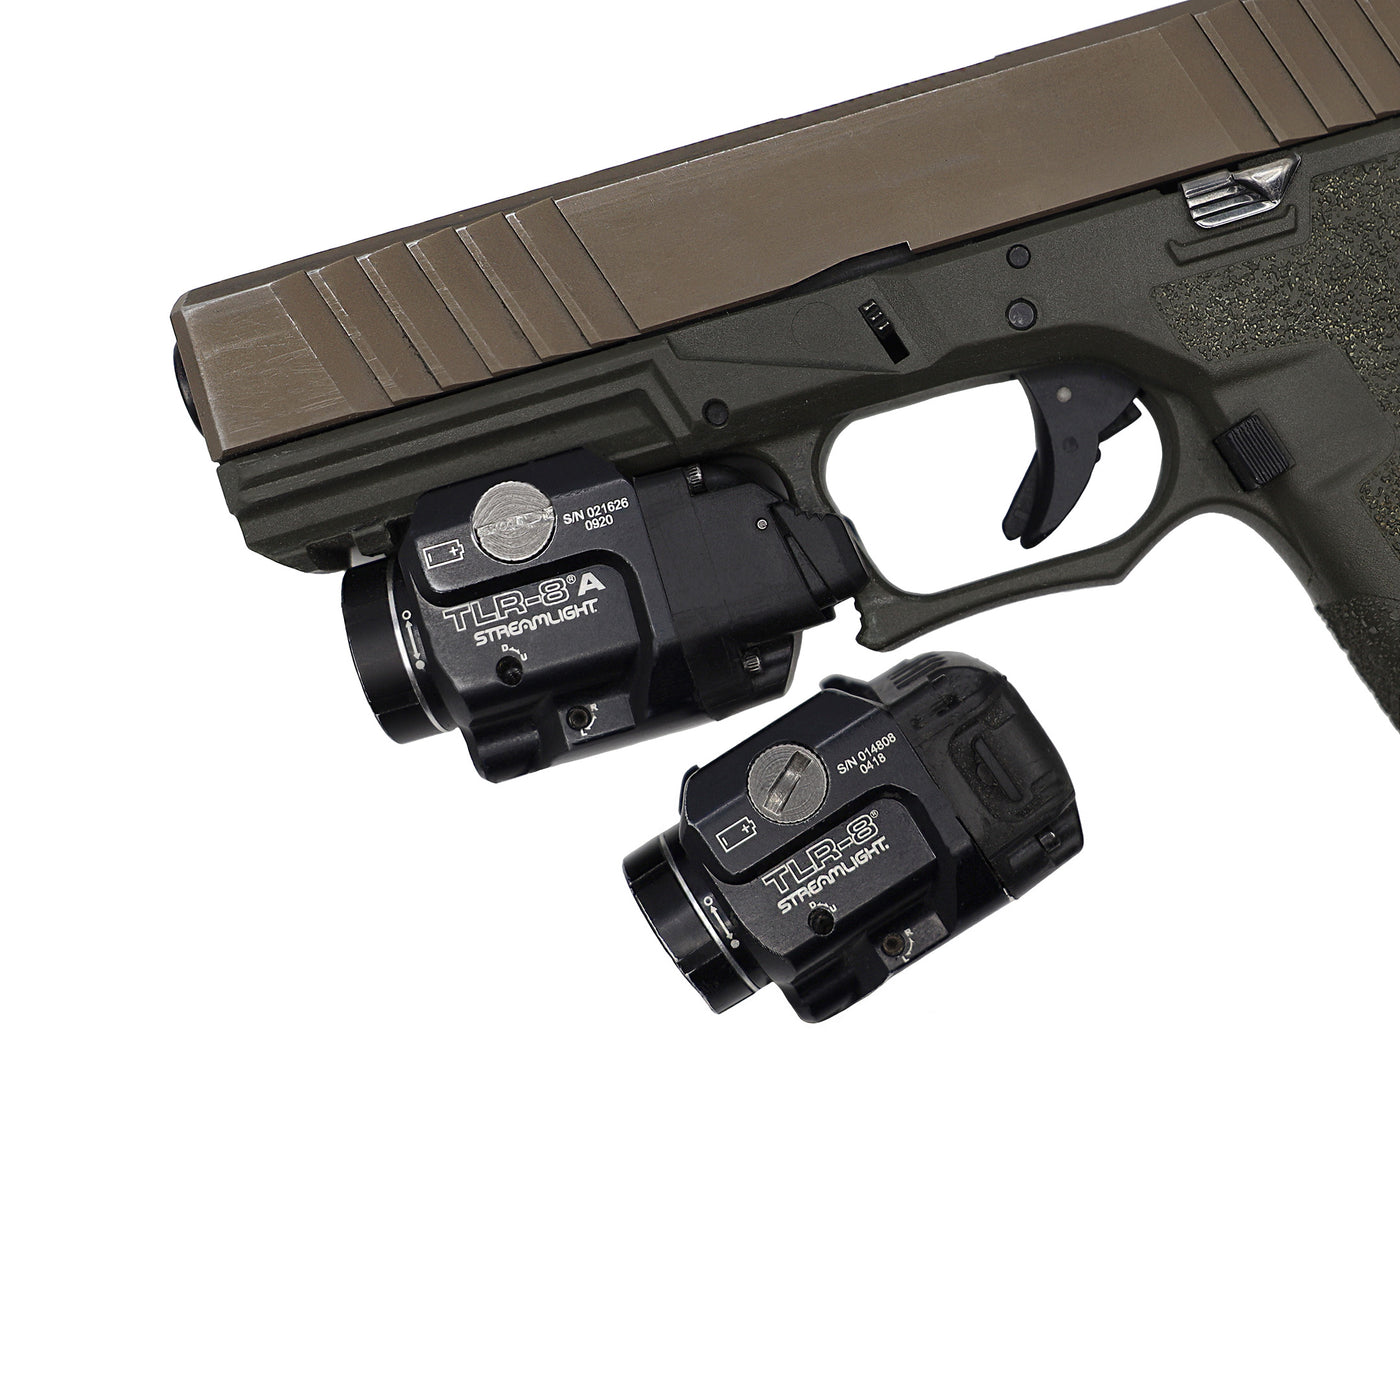 Polymer80 firearm with streamlight TLR8 weapon light